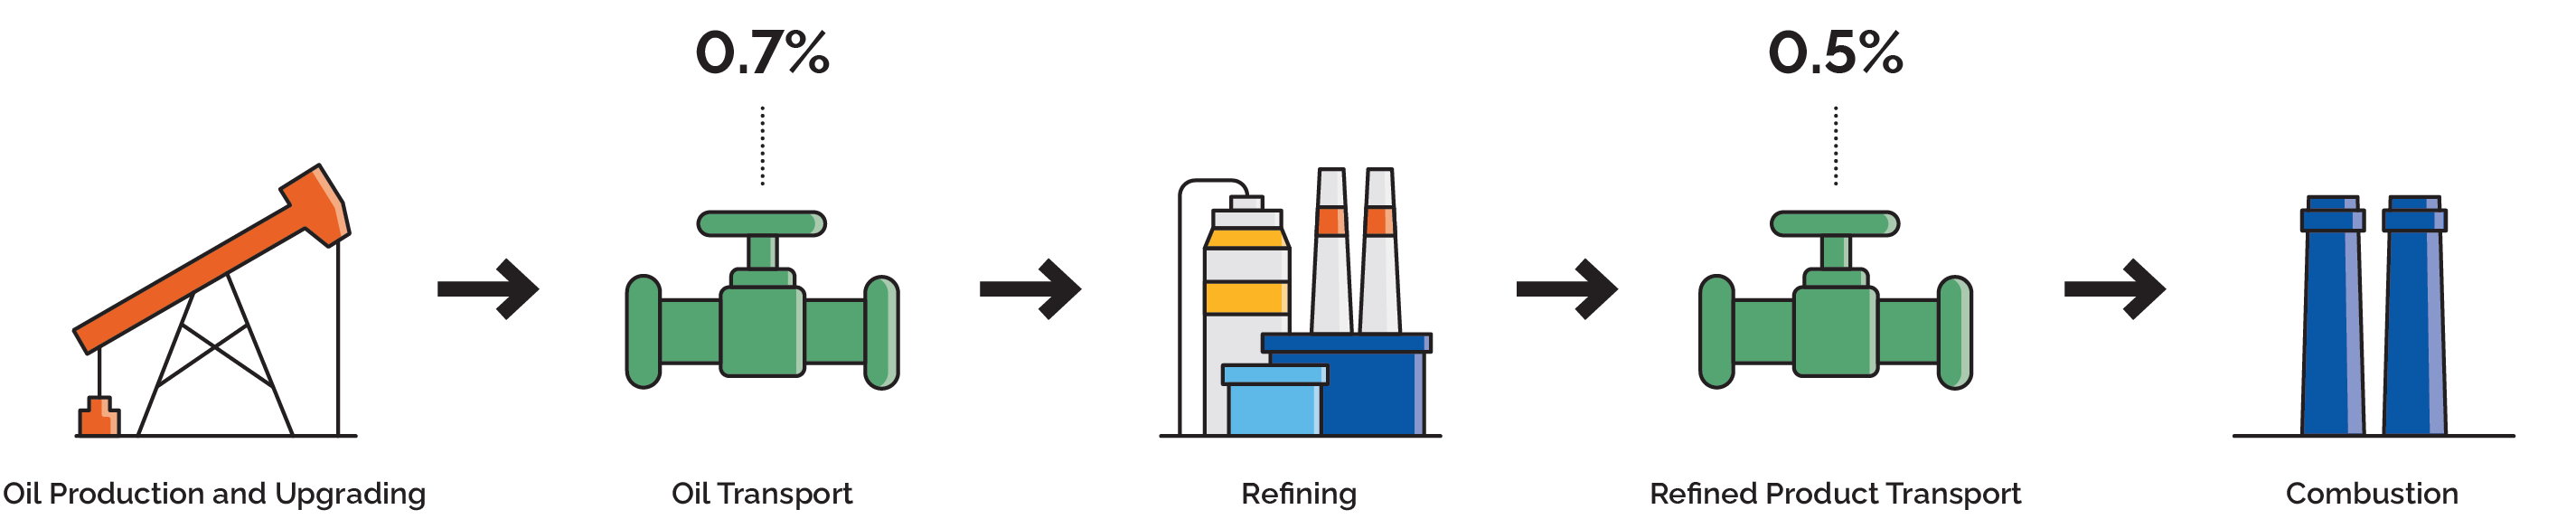 Graphic showing the flow process of the extraction of oil from the ground to the final product. After extraction, the oil is transported, then moved into the refining process, then the refined oil product is transported to the final use of the refined oil product.